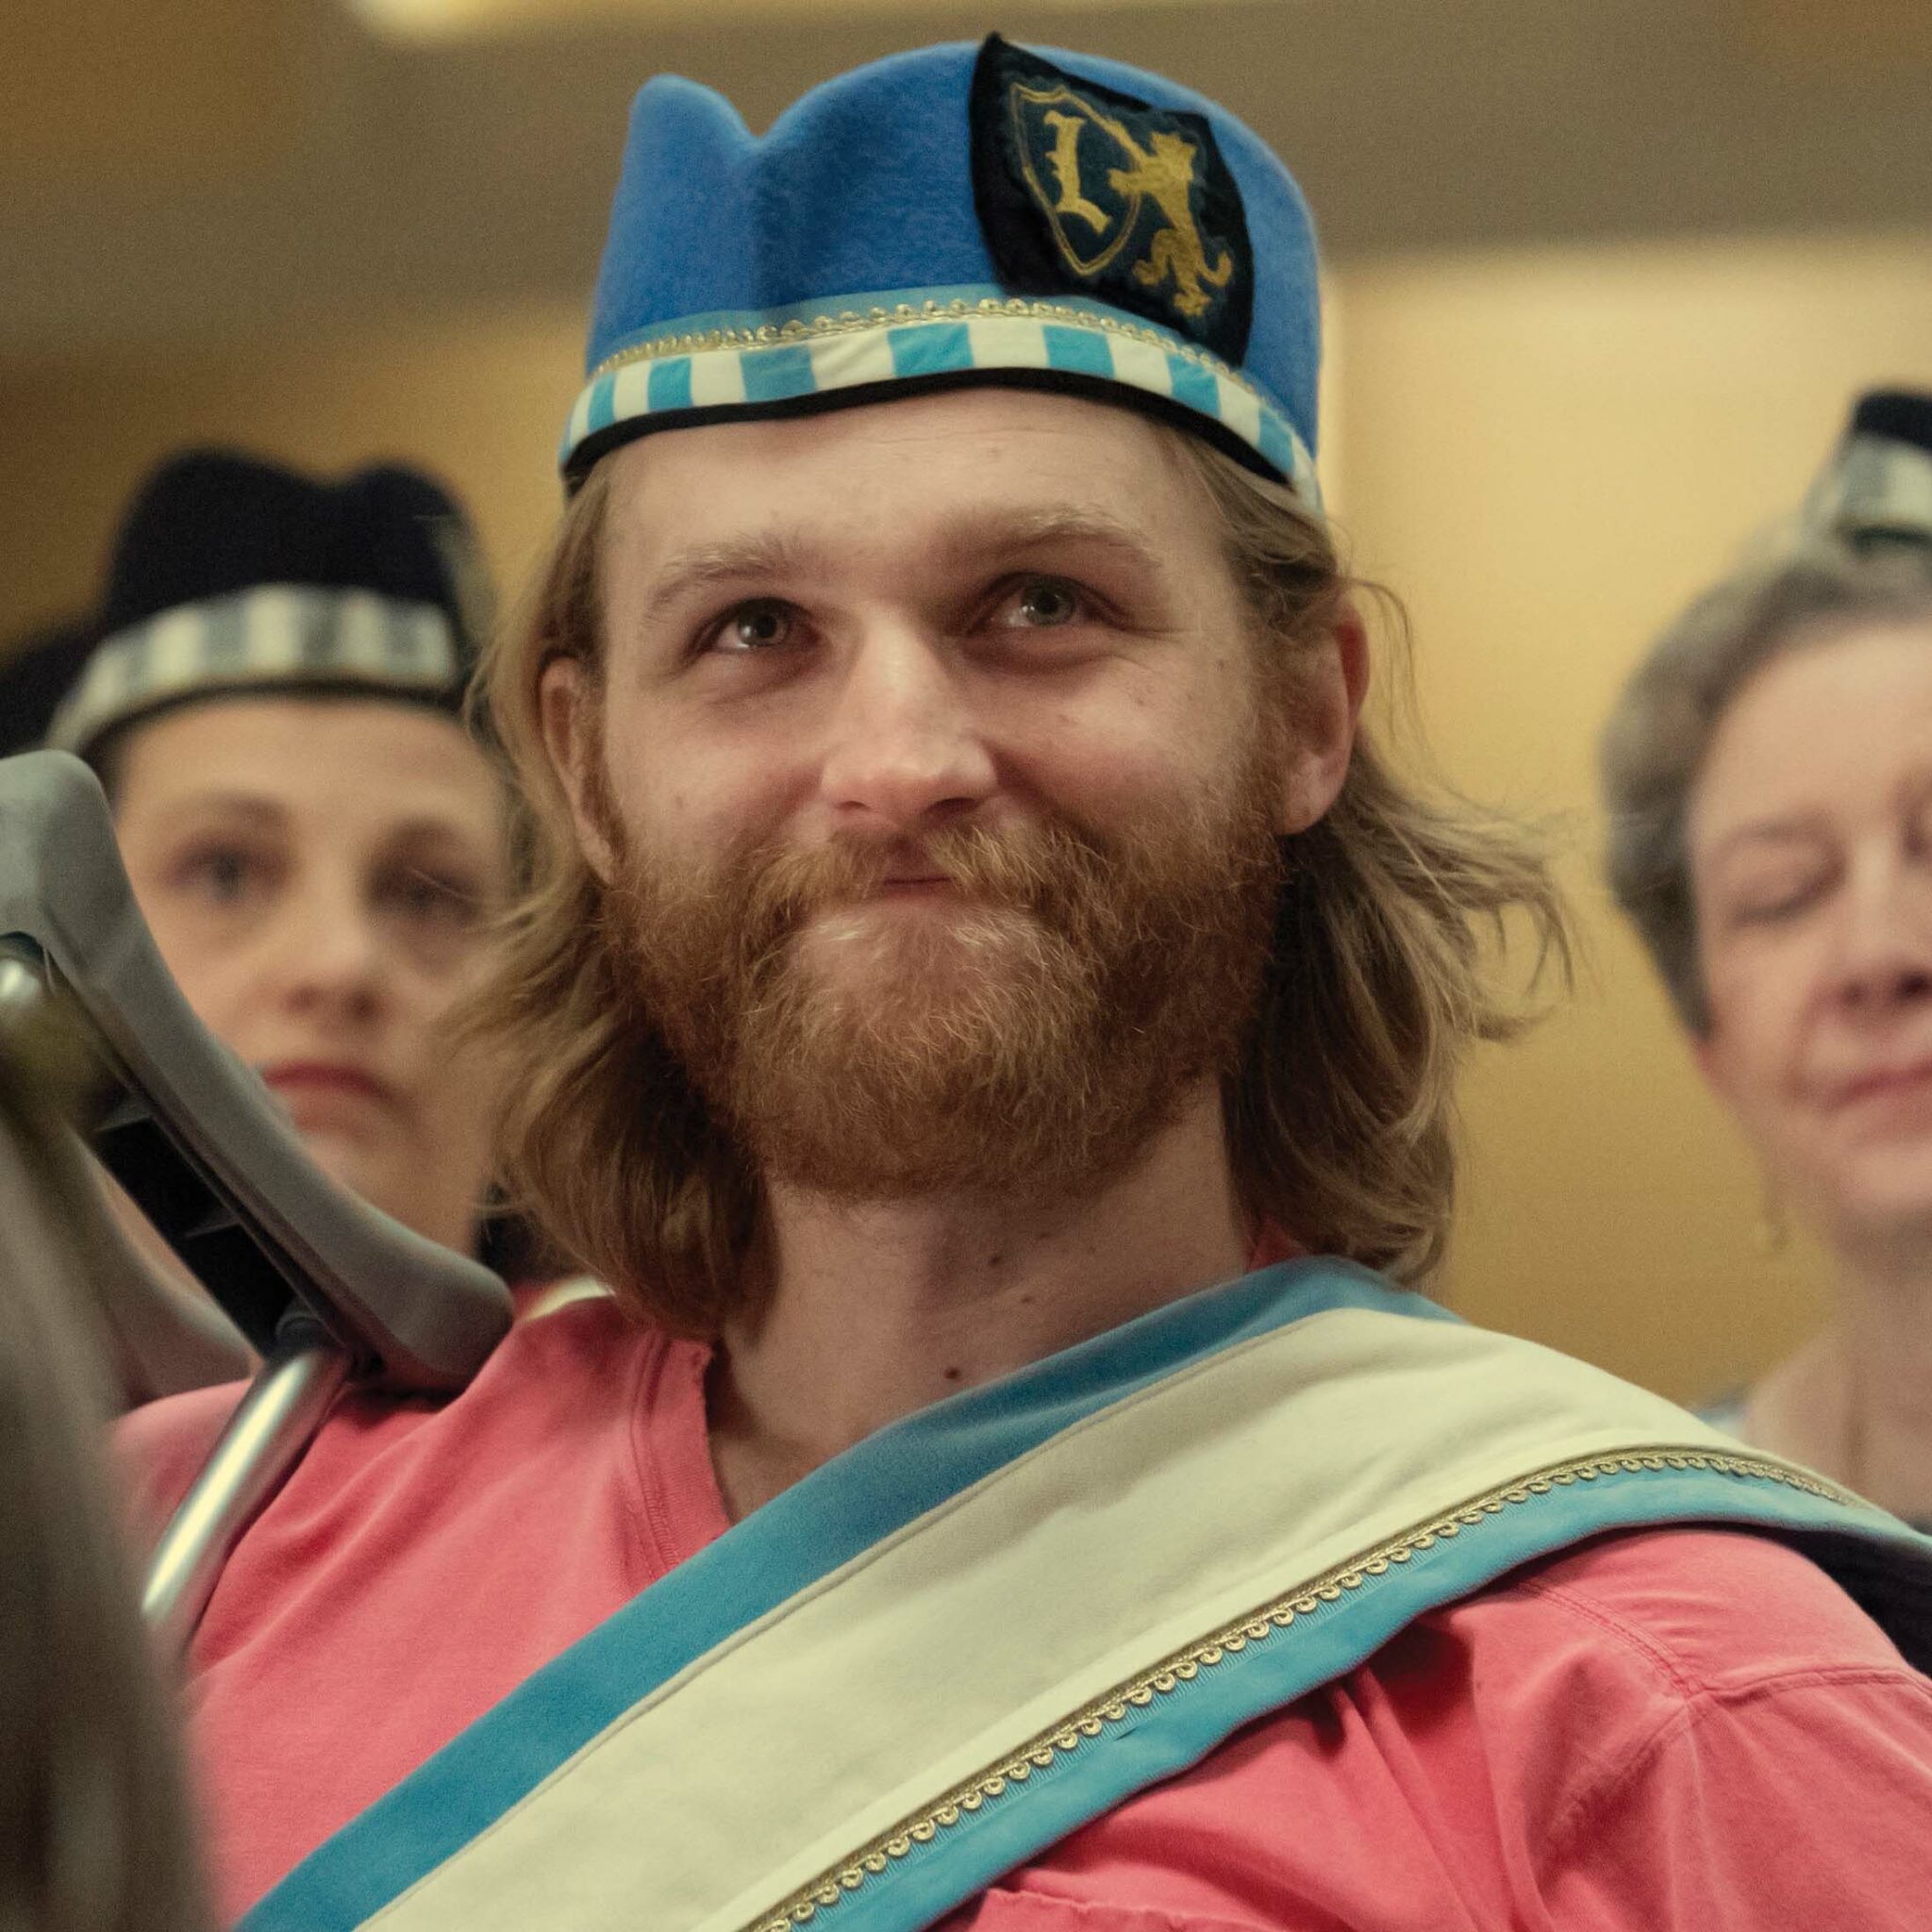 Dud, played by Wyatt Russell, is an initiate in a quasi-Masonic order in the AMC series Lodge 49.